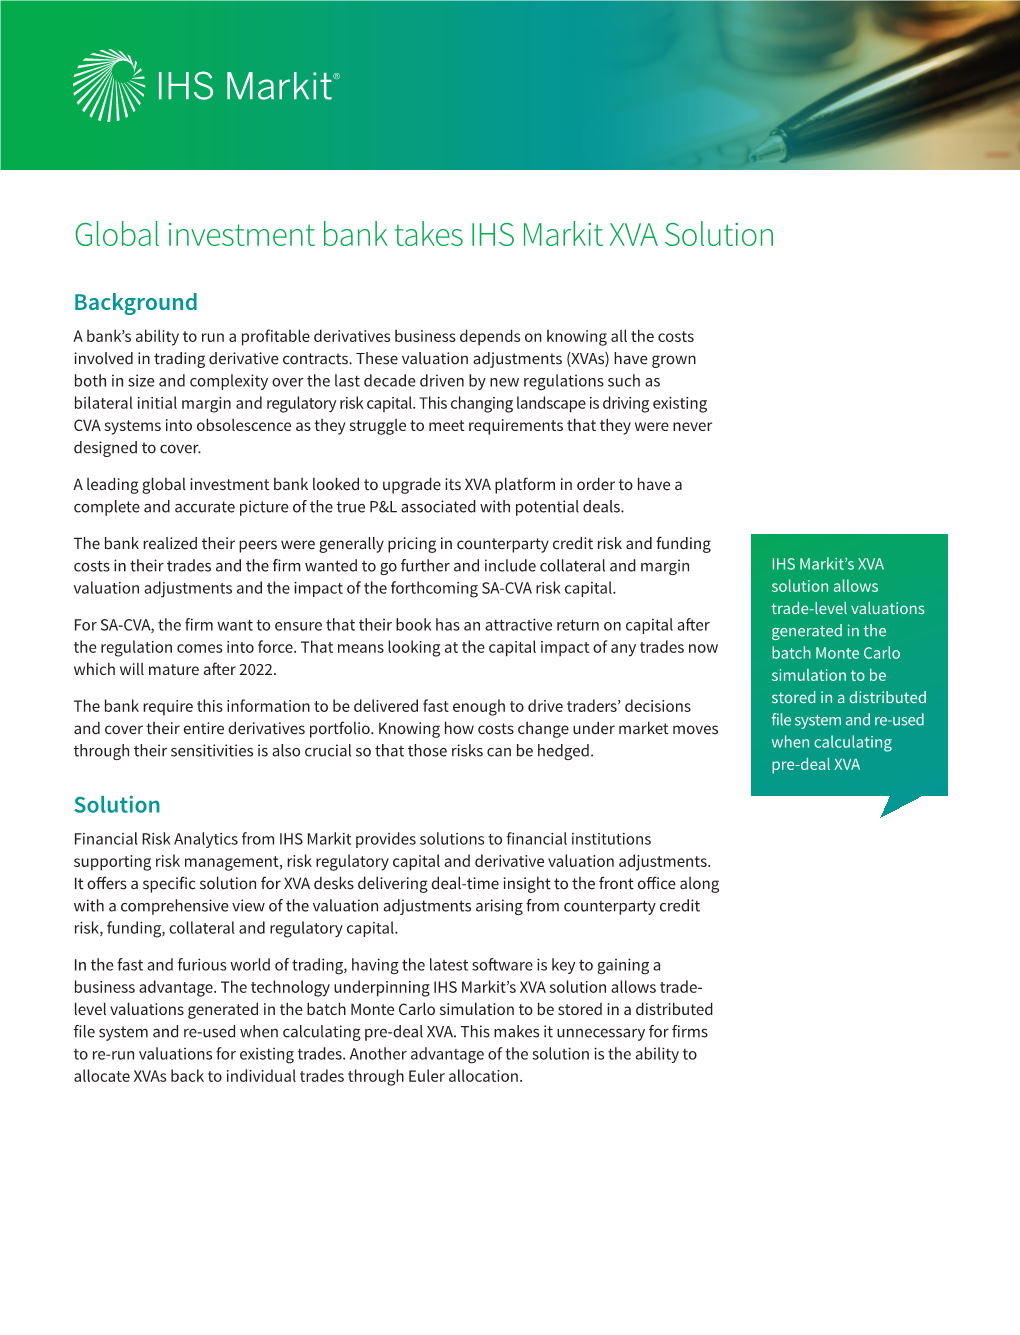 Global Investment Bank Takes IHS Markit XVA Solution